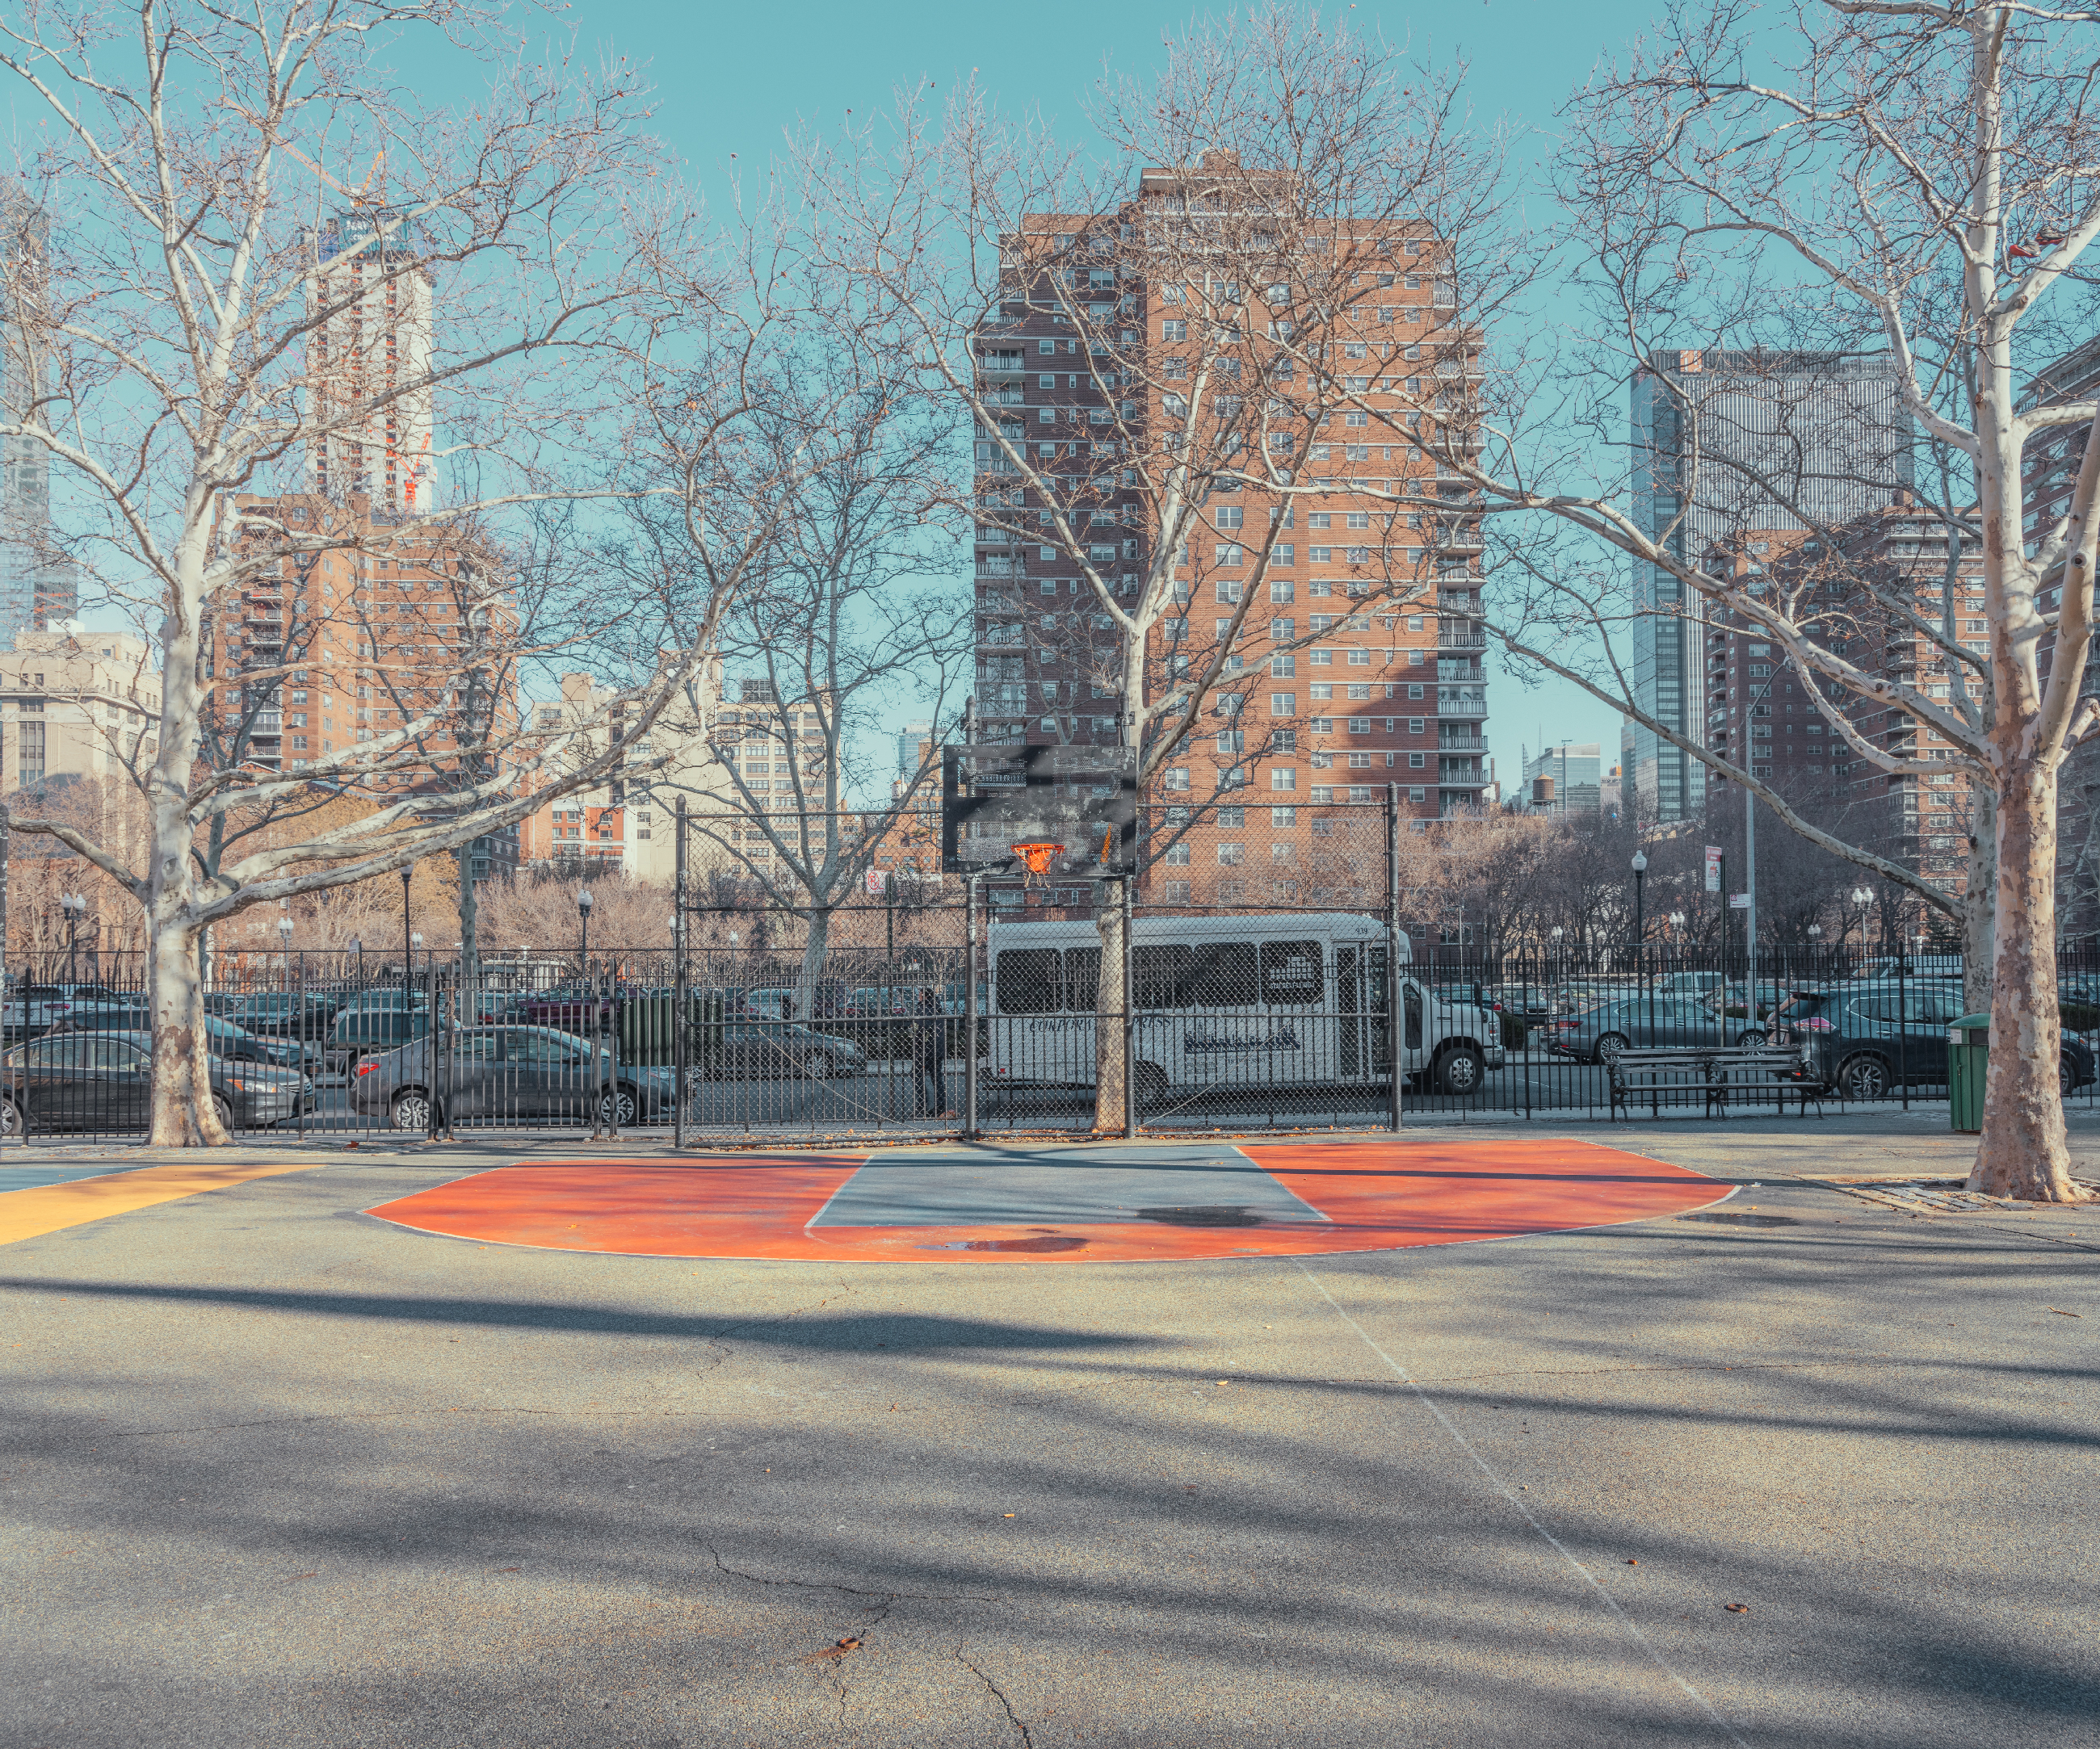 ludwig-favre-ny-basketball-courts-02